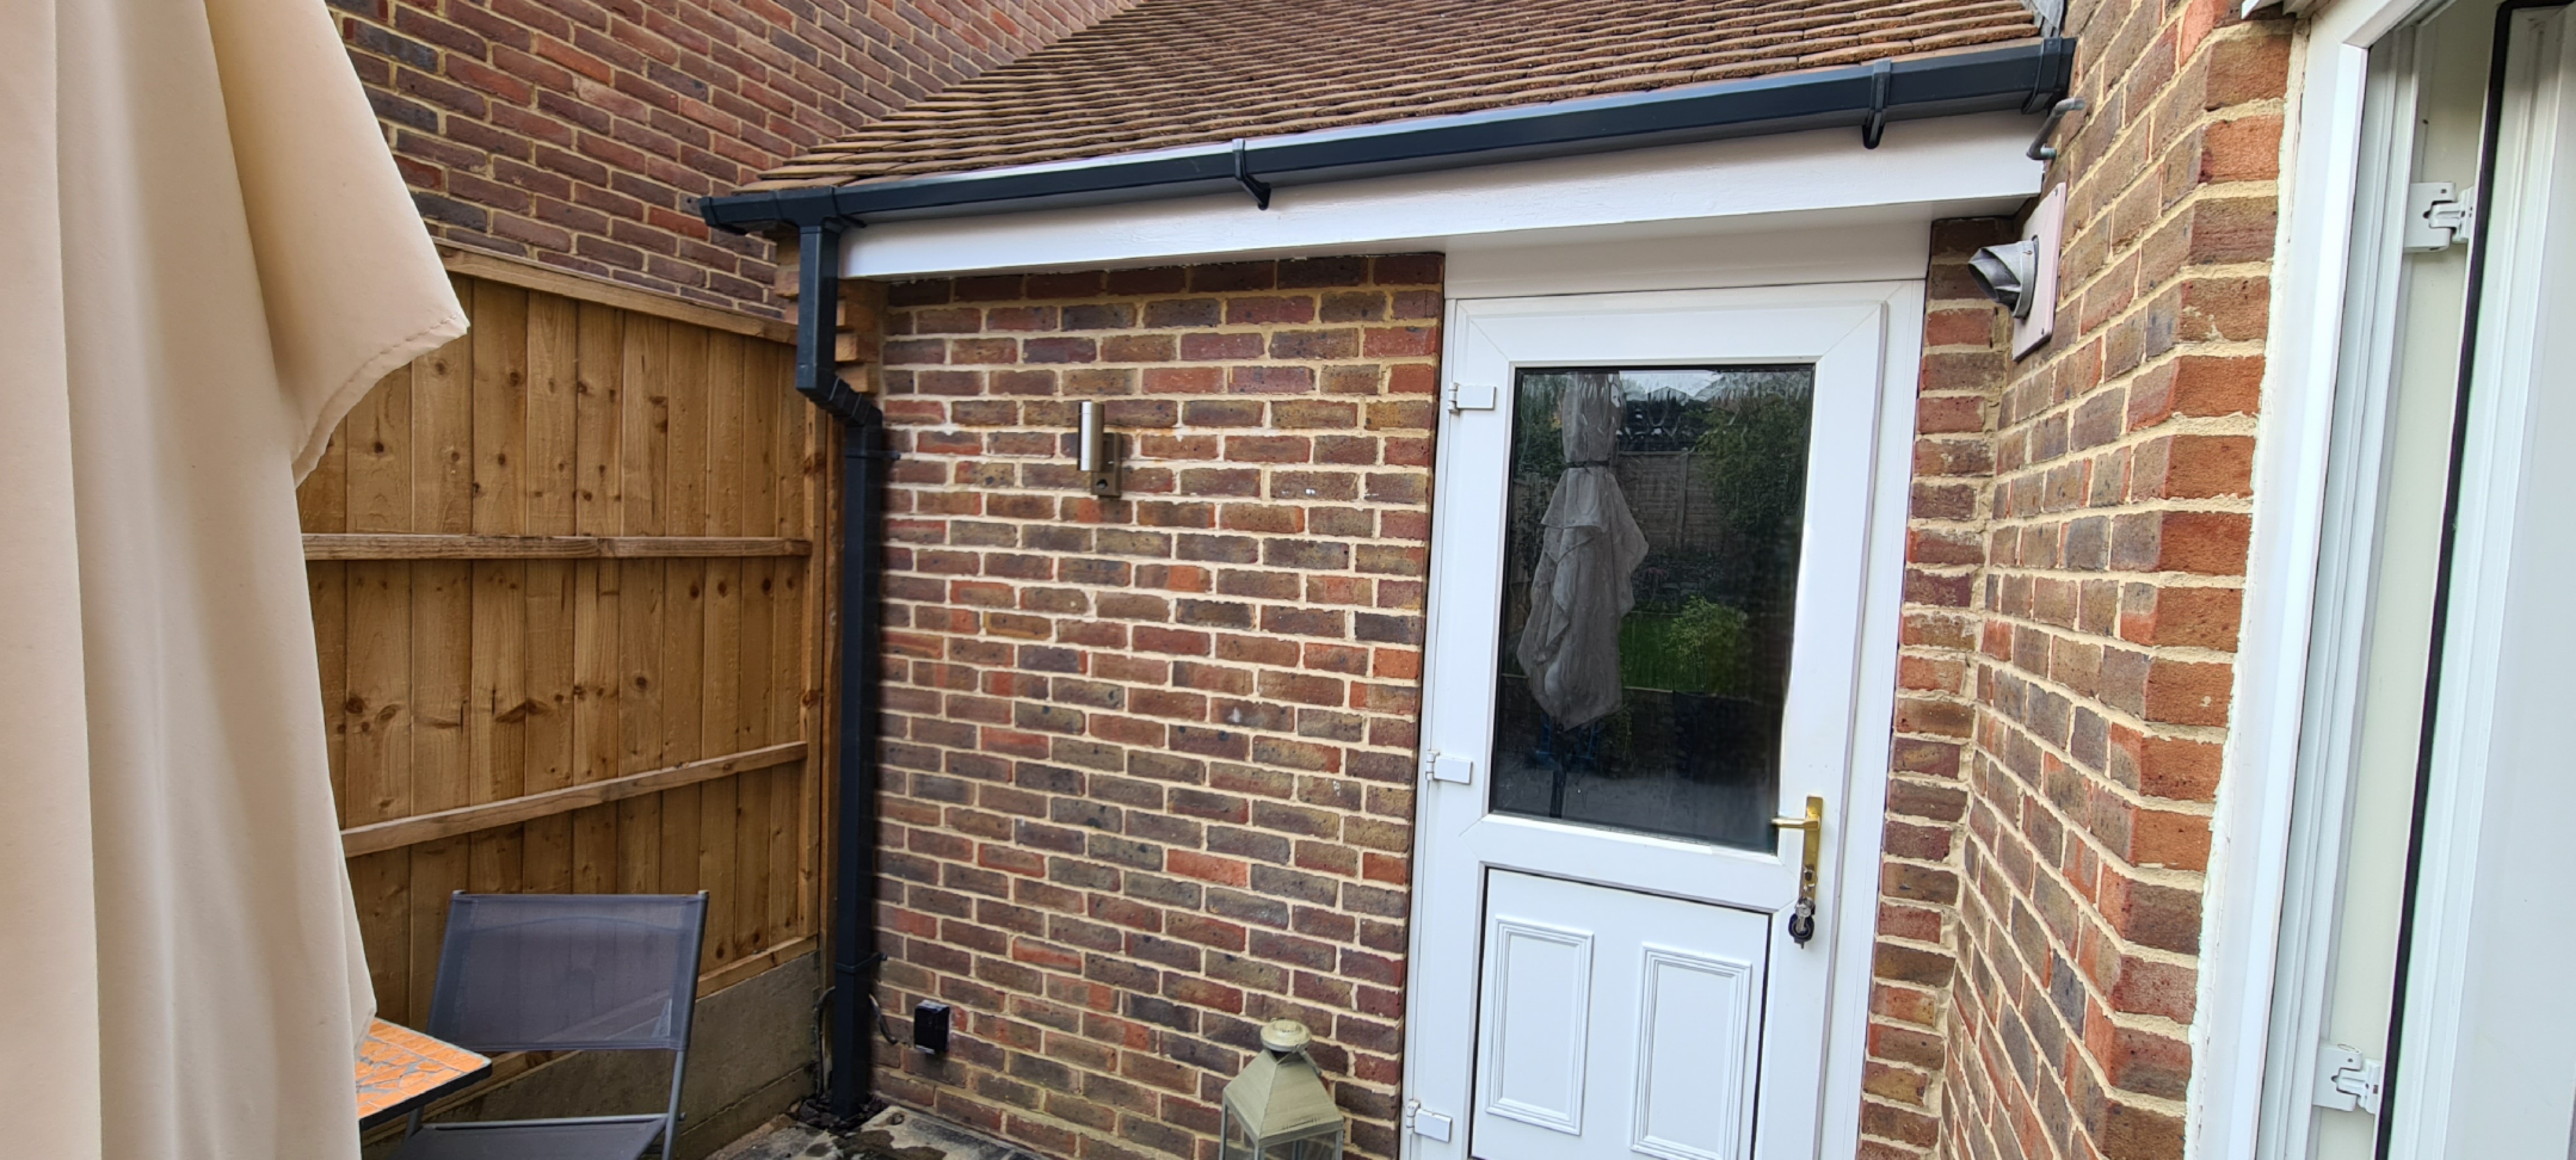 Fully repaired and finished fascia, soffits and guttering